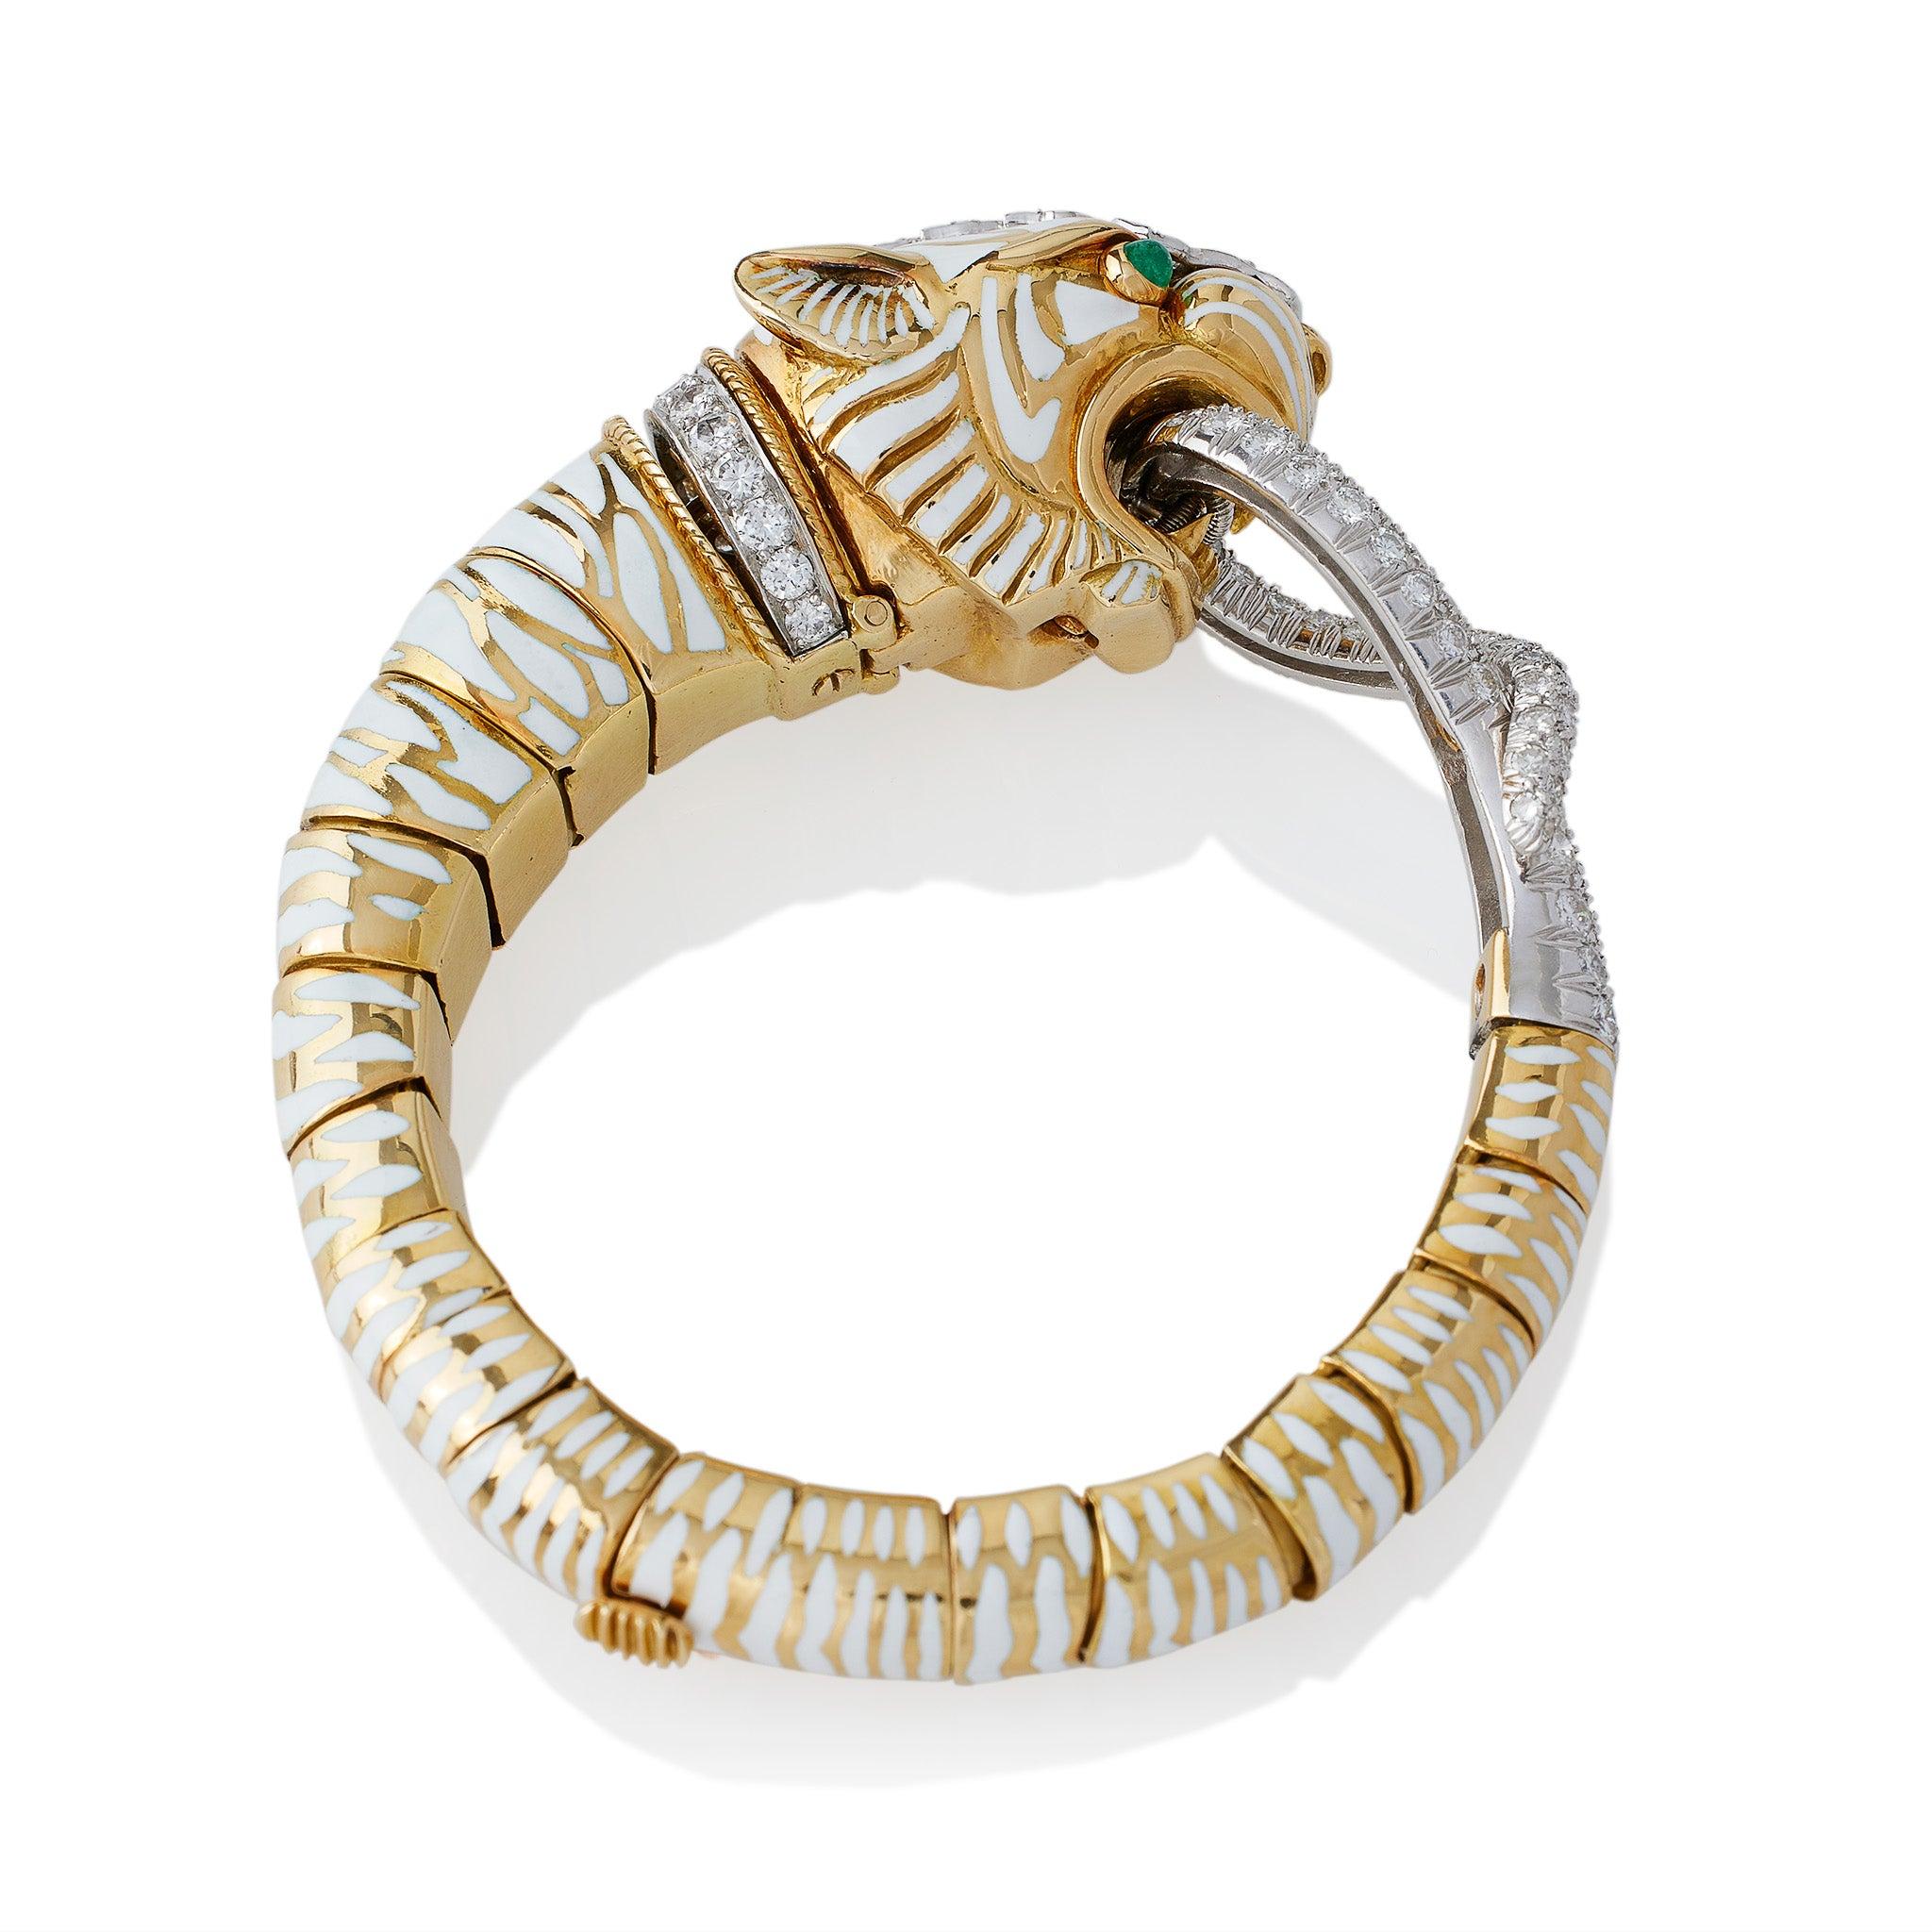 First created in this color scheme in 1967, this early David Webb enamel flexible tiger bangle bracelet is set with emeralds and over 5 carats of diamonds. A tiger with diamond blaze and collar, white champlevé enamel stripes and and cabochon